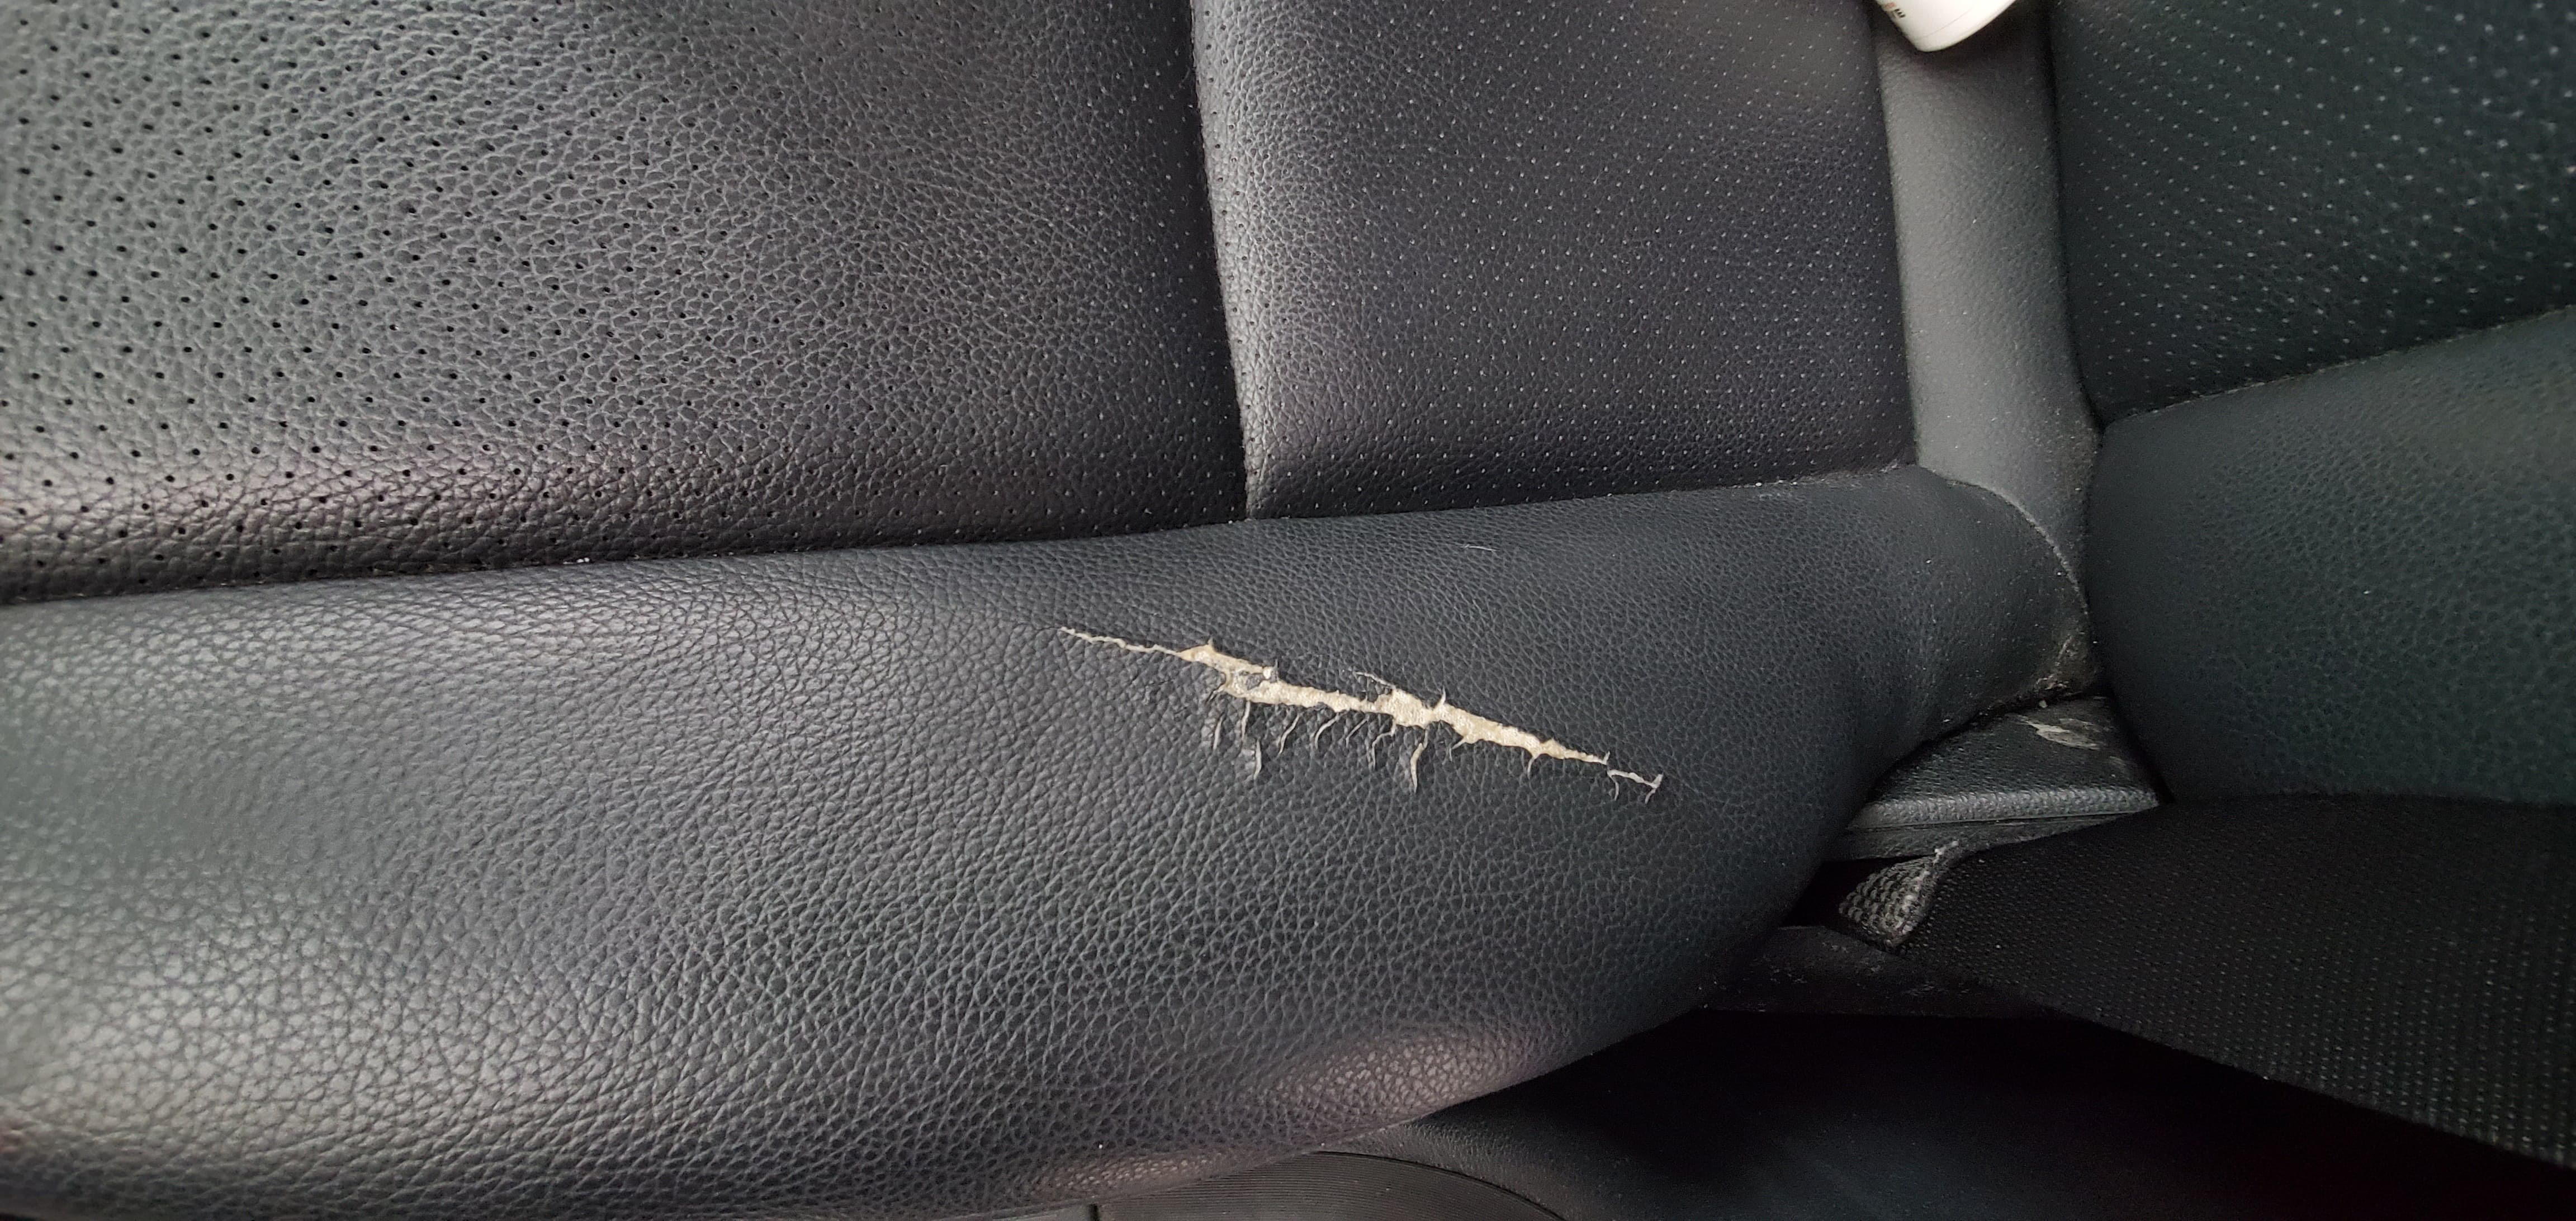 How To Fix Leather Tear How To Repair A Leather Car Seat